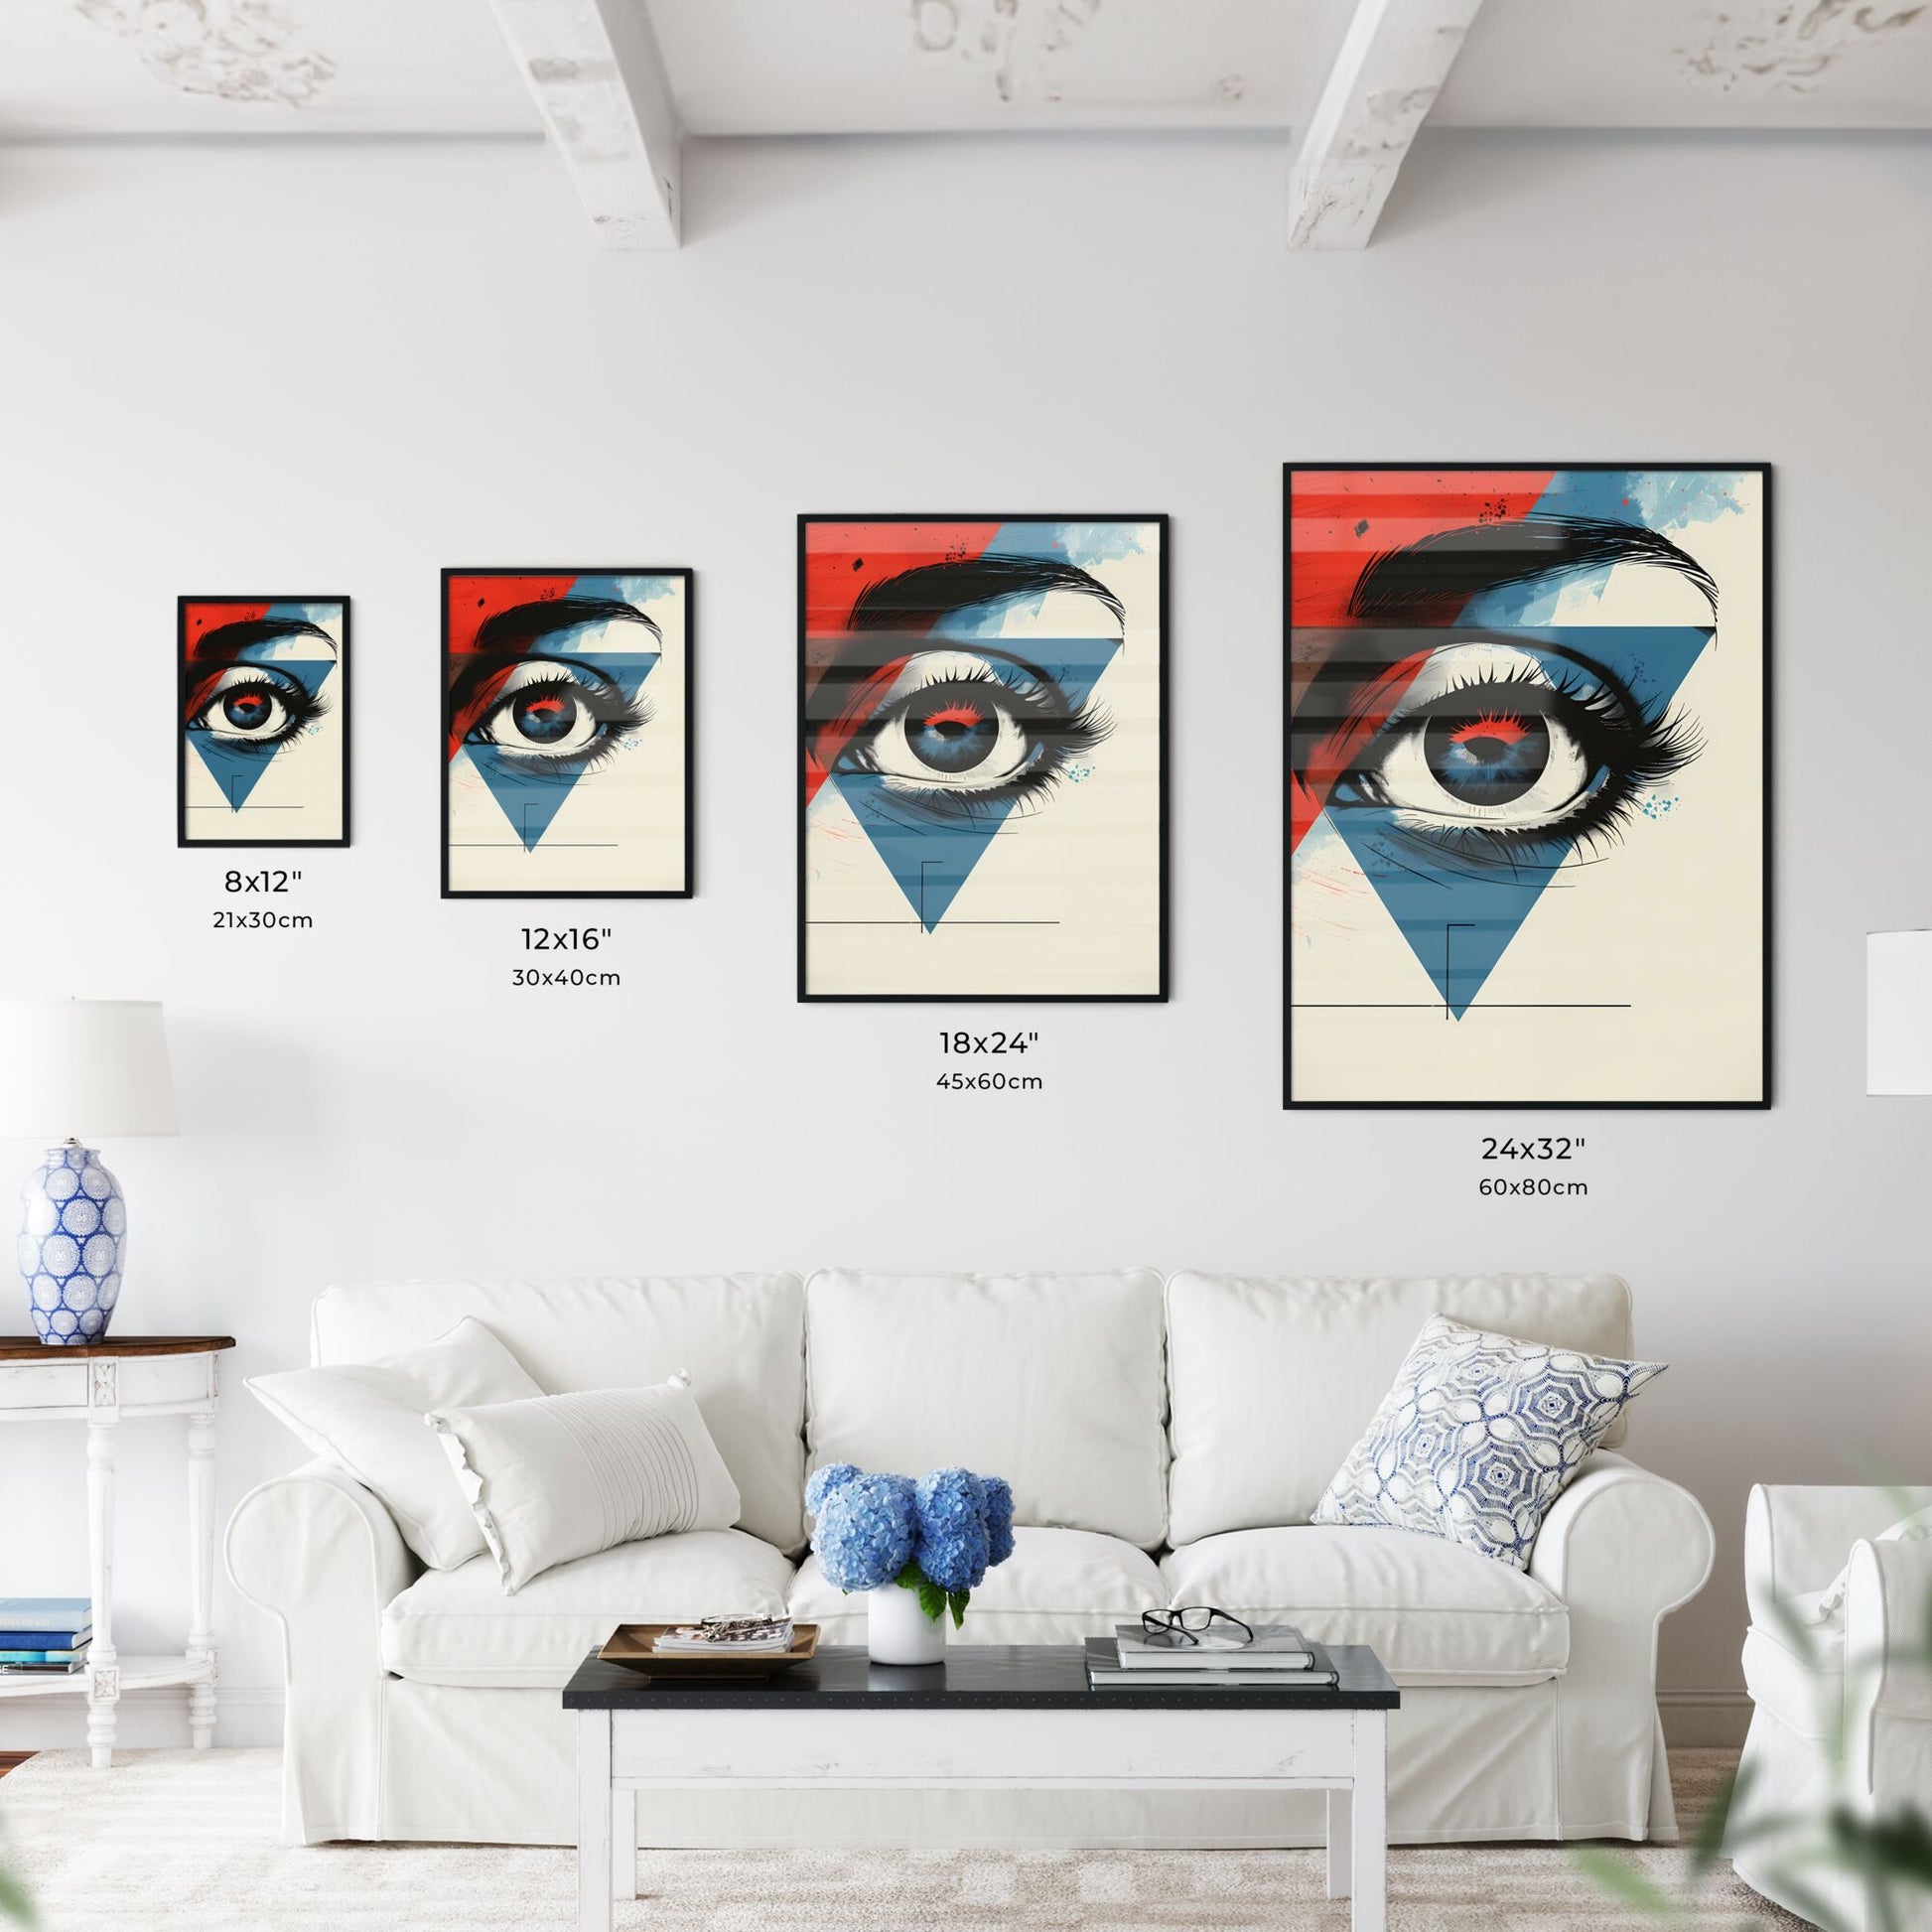 Dramatic Bauhaus Eye Painting: Minimalist Vintage Poster in Red and Blue, Close-Up, Flat Graphic, Shaped Canvas Default Title